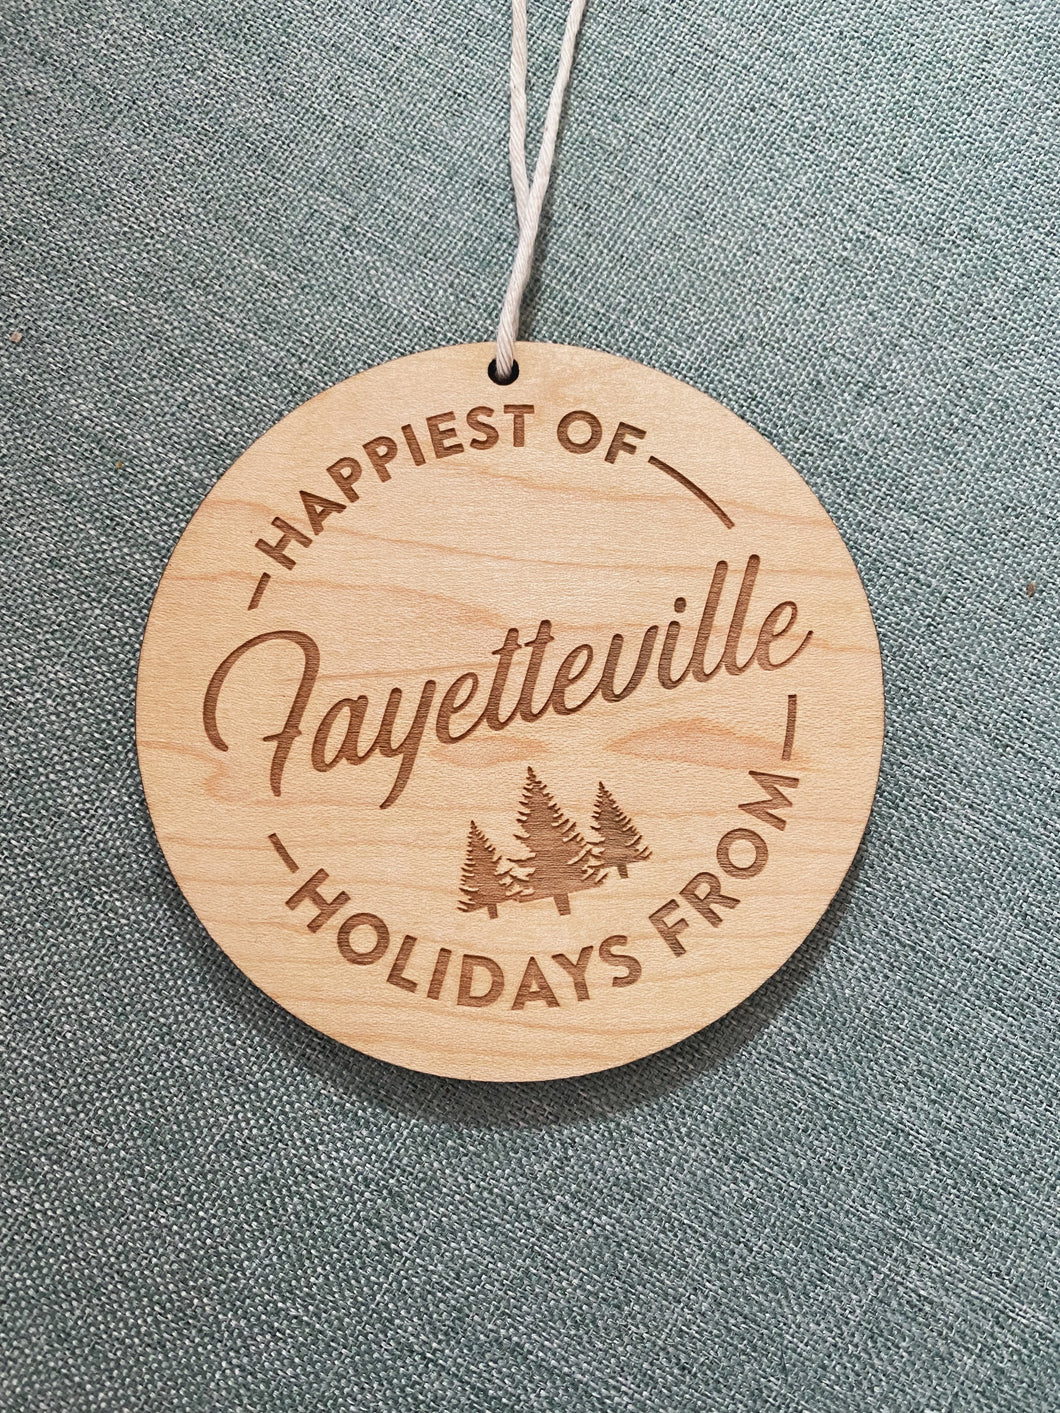 Happiest Of Holidays From Fayetteville